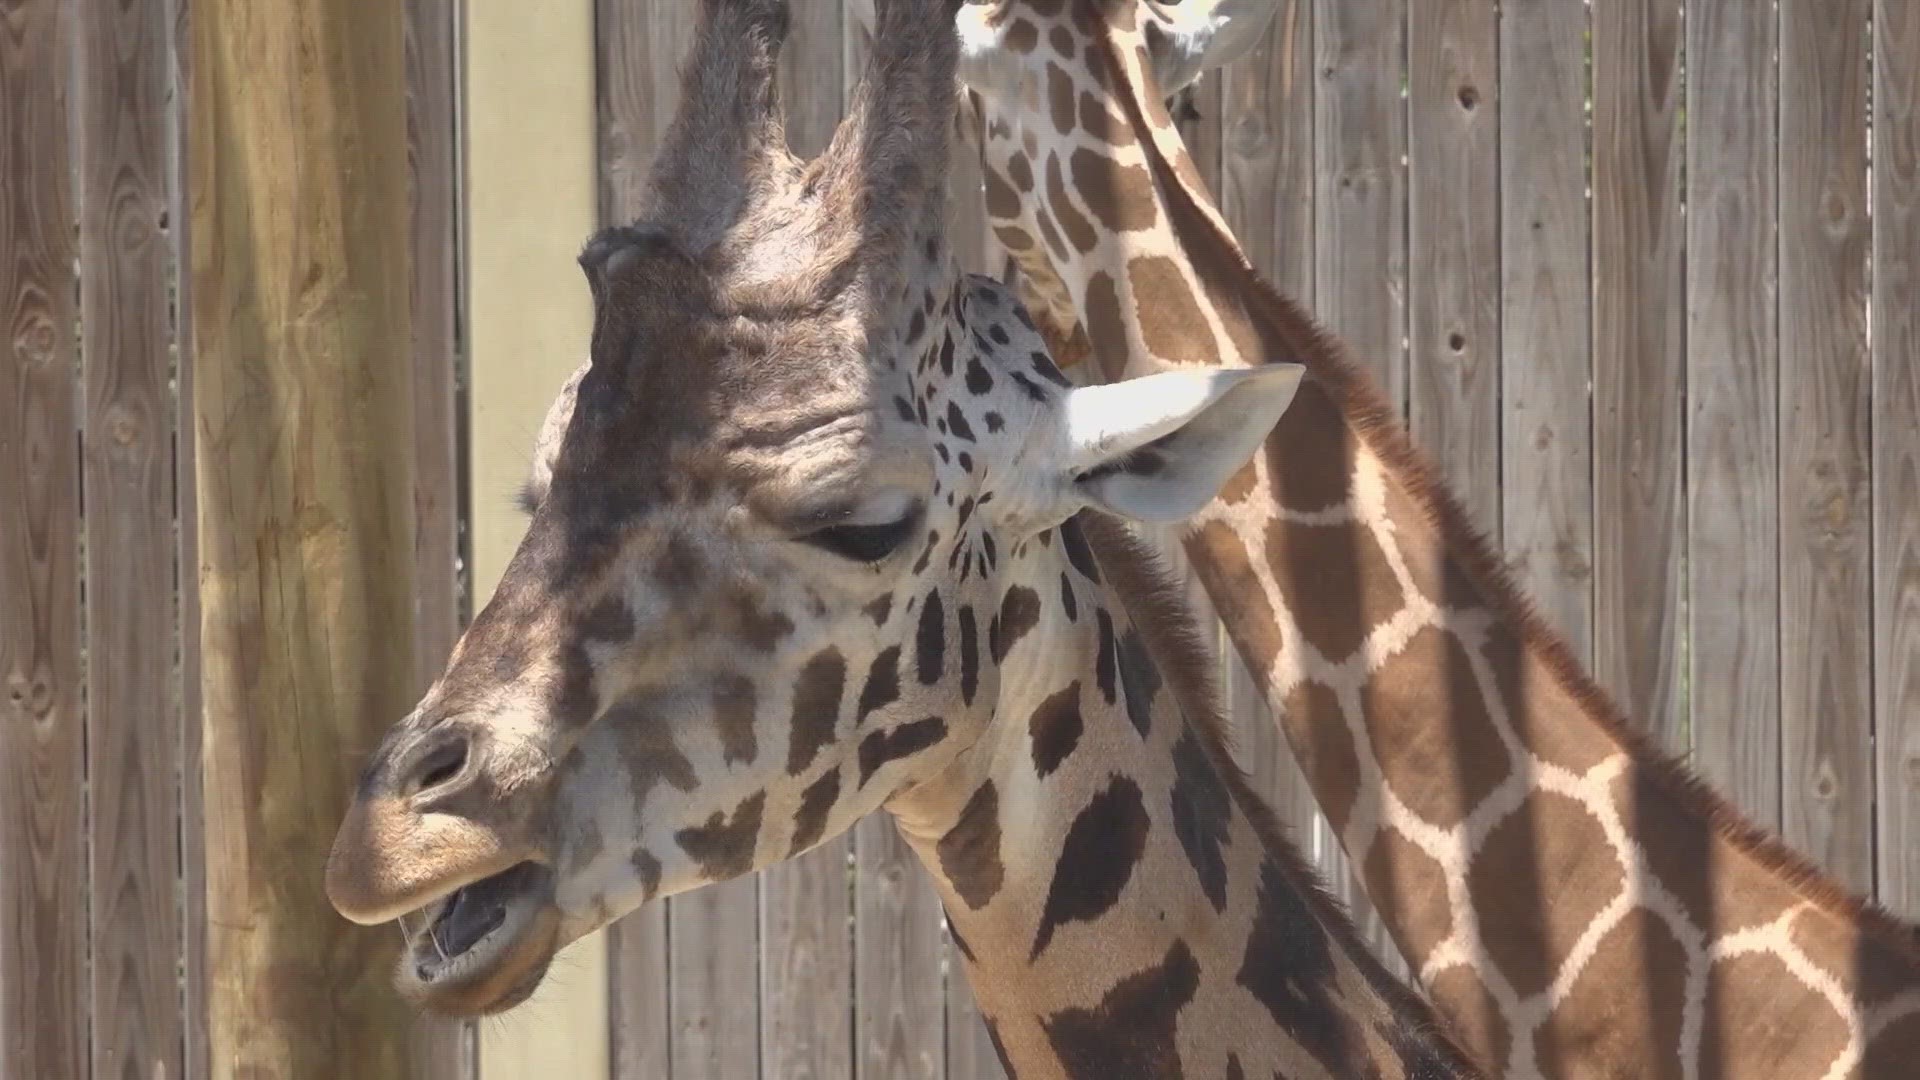 Zoo Midland will be a part of the Preserve at Midland project, and plan to open in mid-2027.